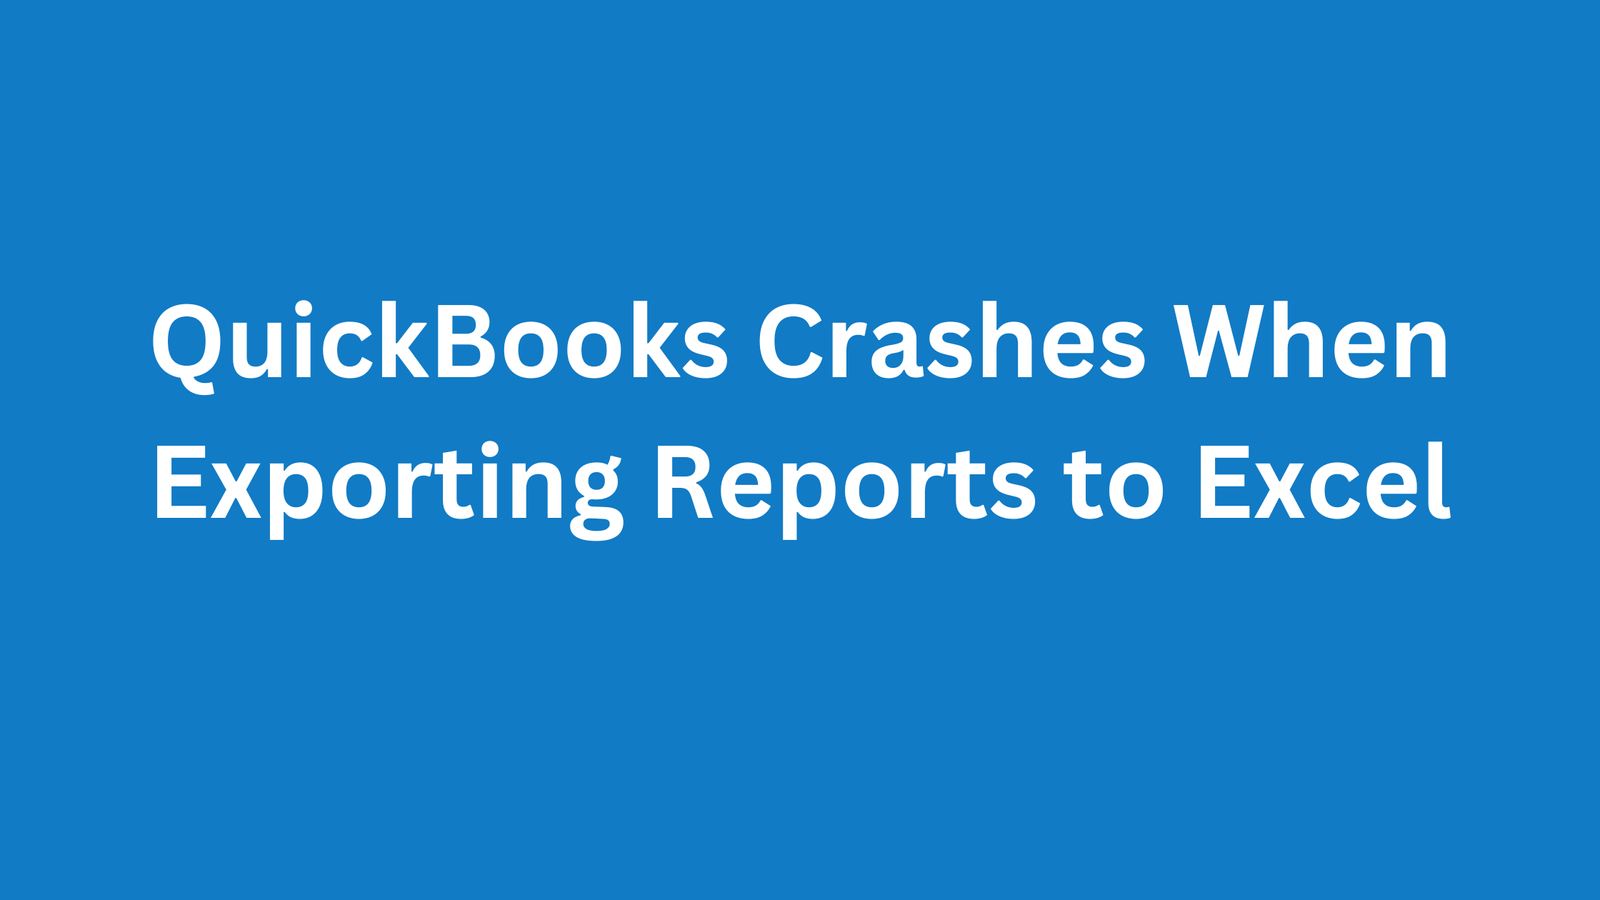 You are currently viewing QuickBooks Crashes When Exporting Reports to Excel